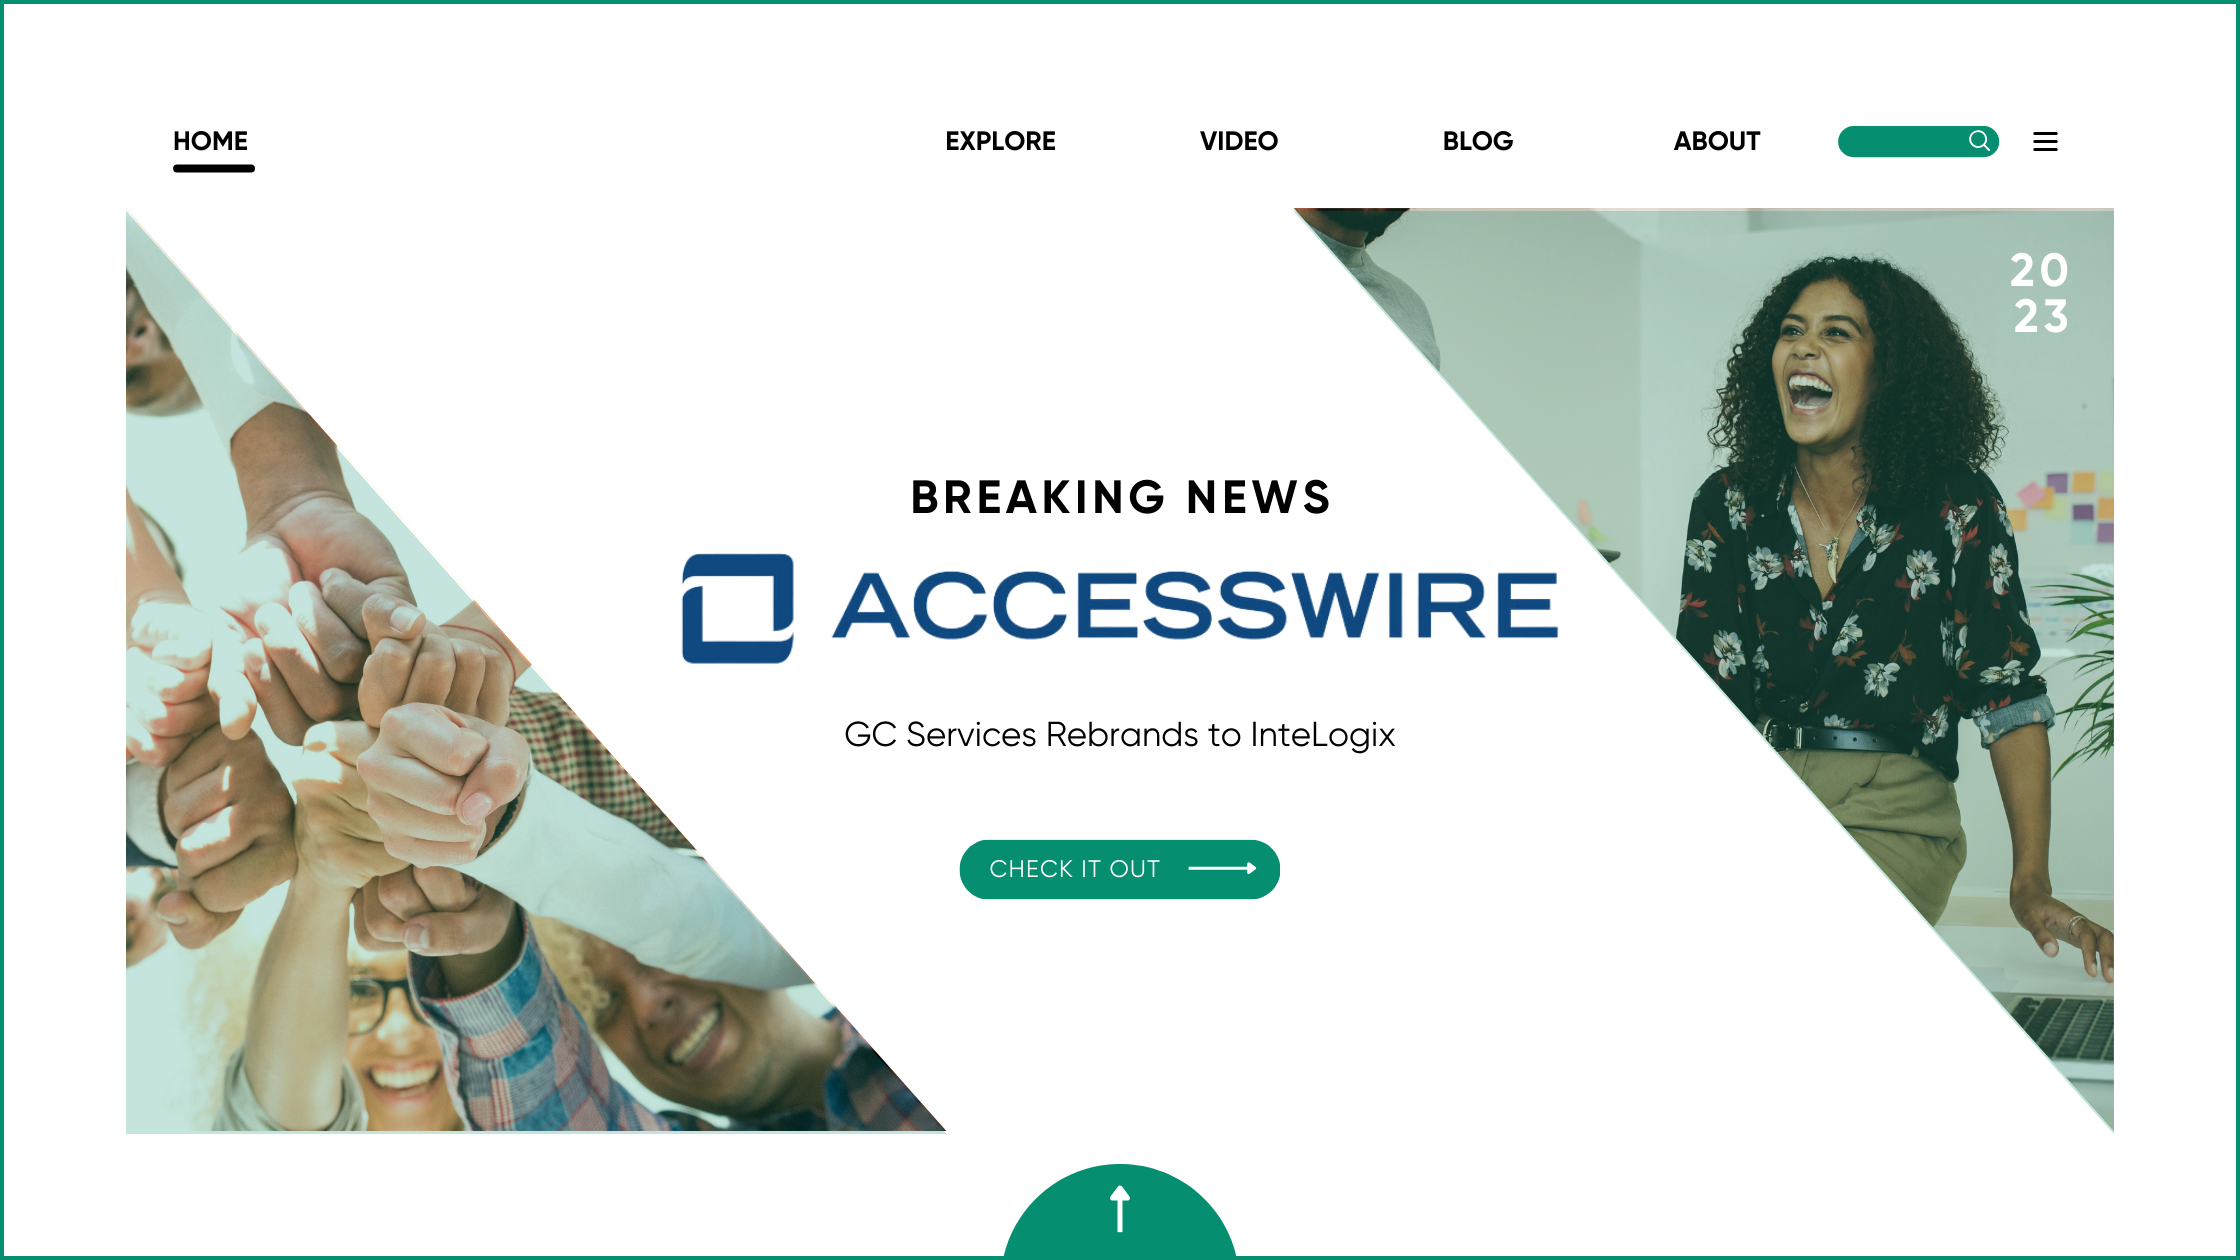 accesswire intelogix rebrand from gc services